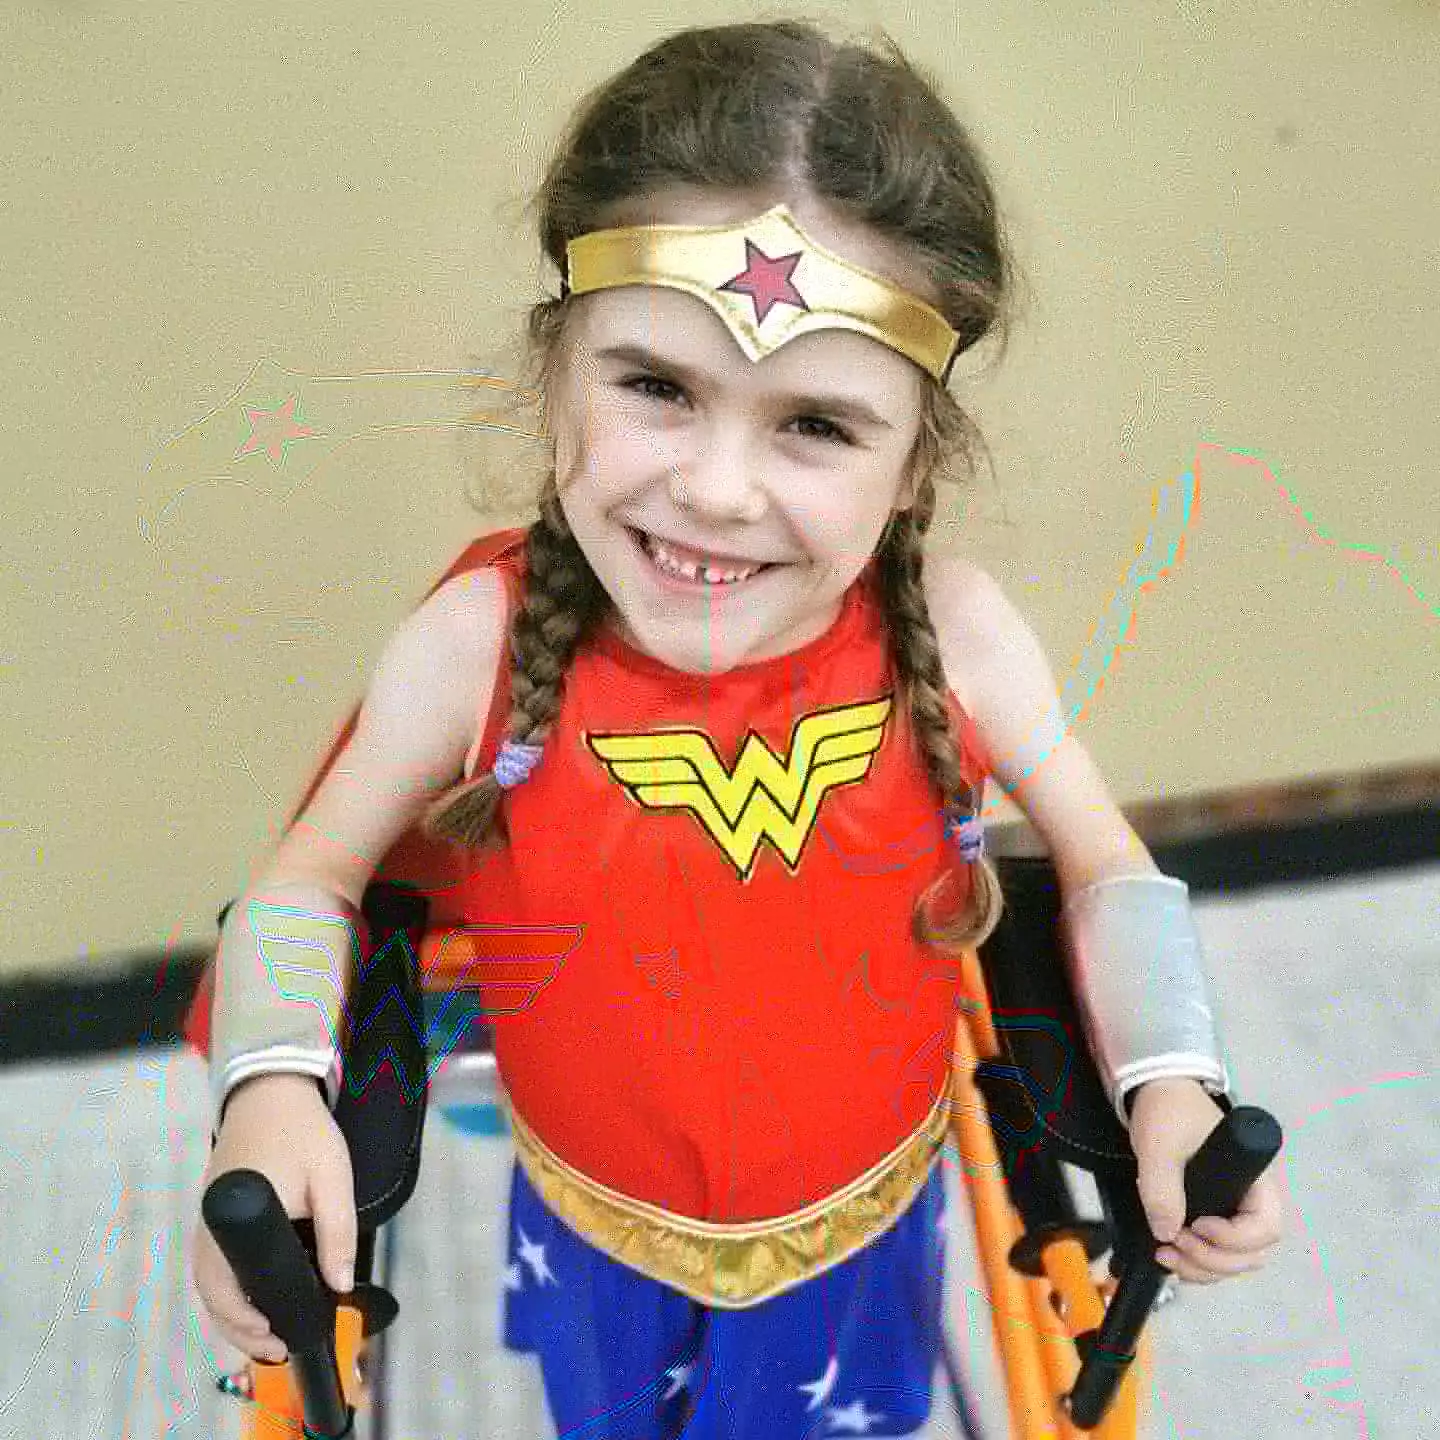 Carmela wants to raise as much as possible to fight her 'horrible disease'.